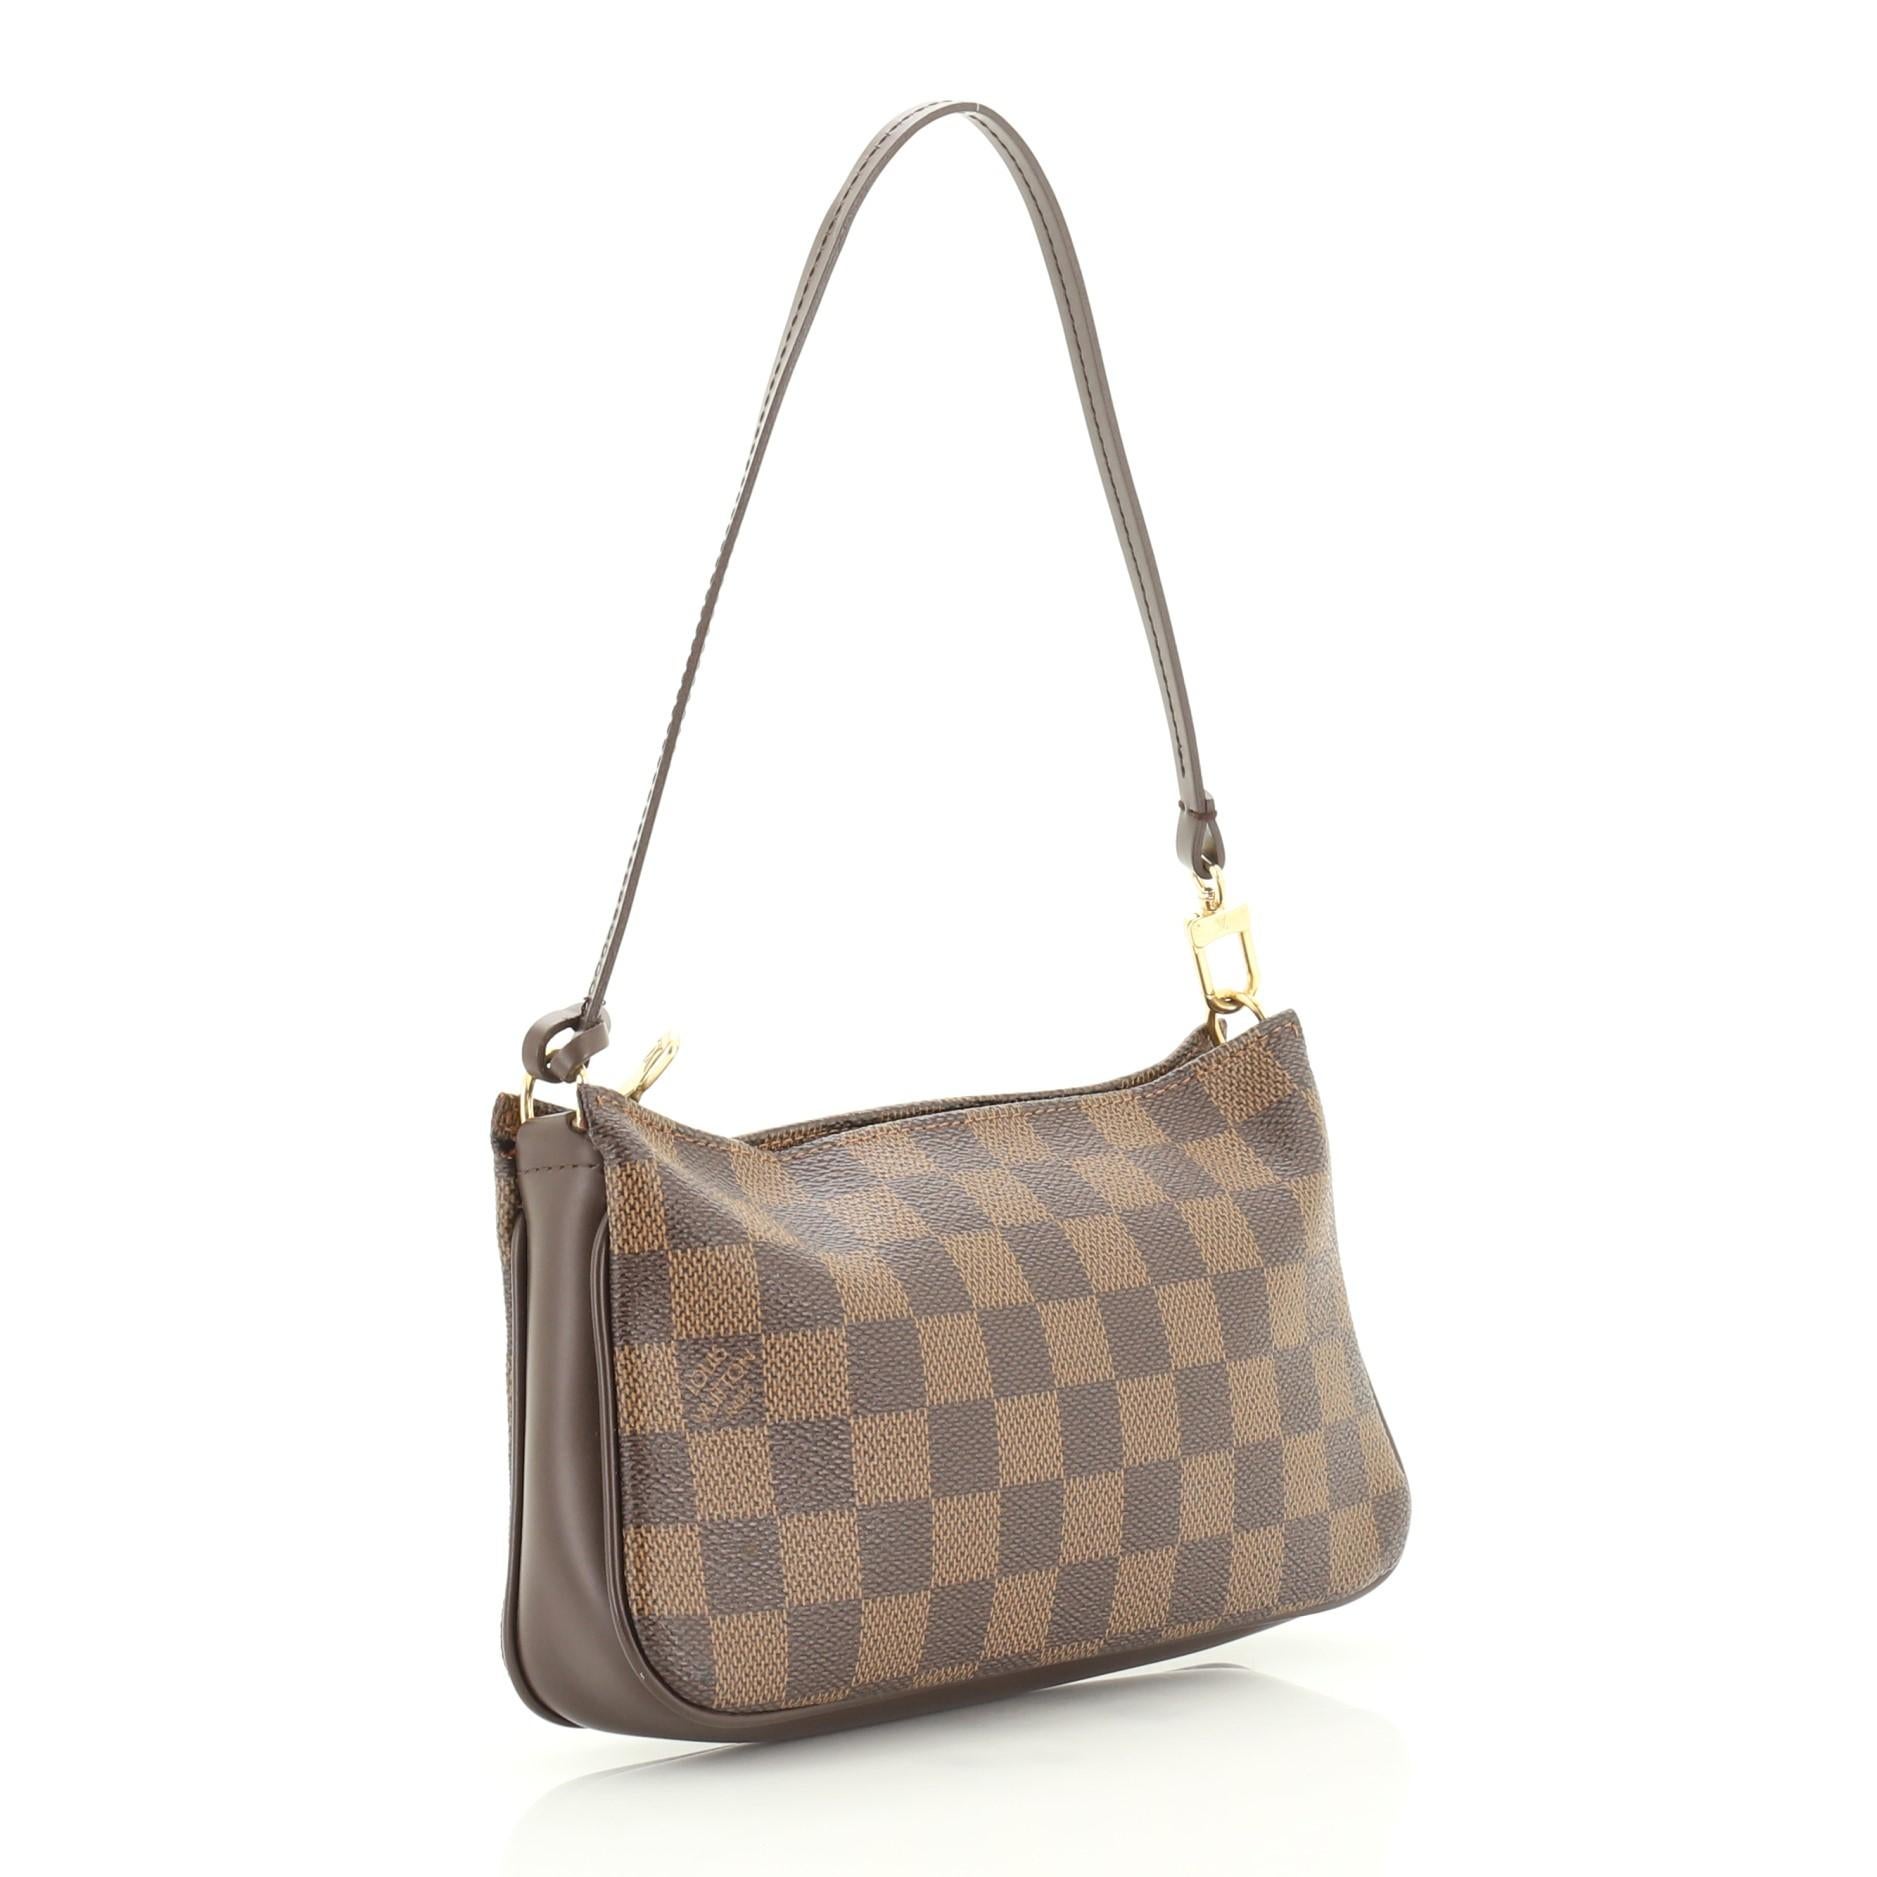 This Louis Vuitton Navona Pochette Accessoires Damier, crafted from damier ebene coated canvas, features a flat leather strap and gold-tone hardware. Its zip closure opens to an orange fabric interior. Authenticity code reads: FL0035. 

Condition: